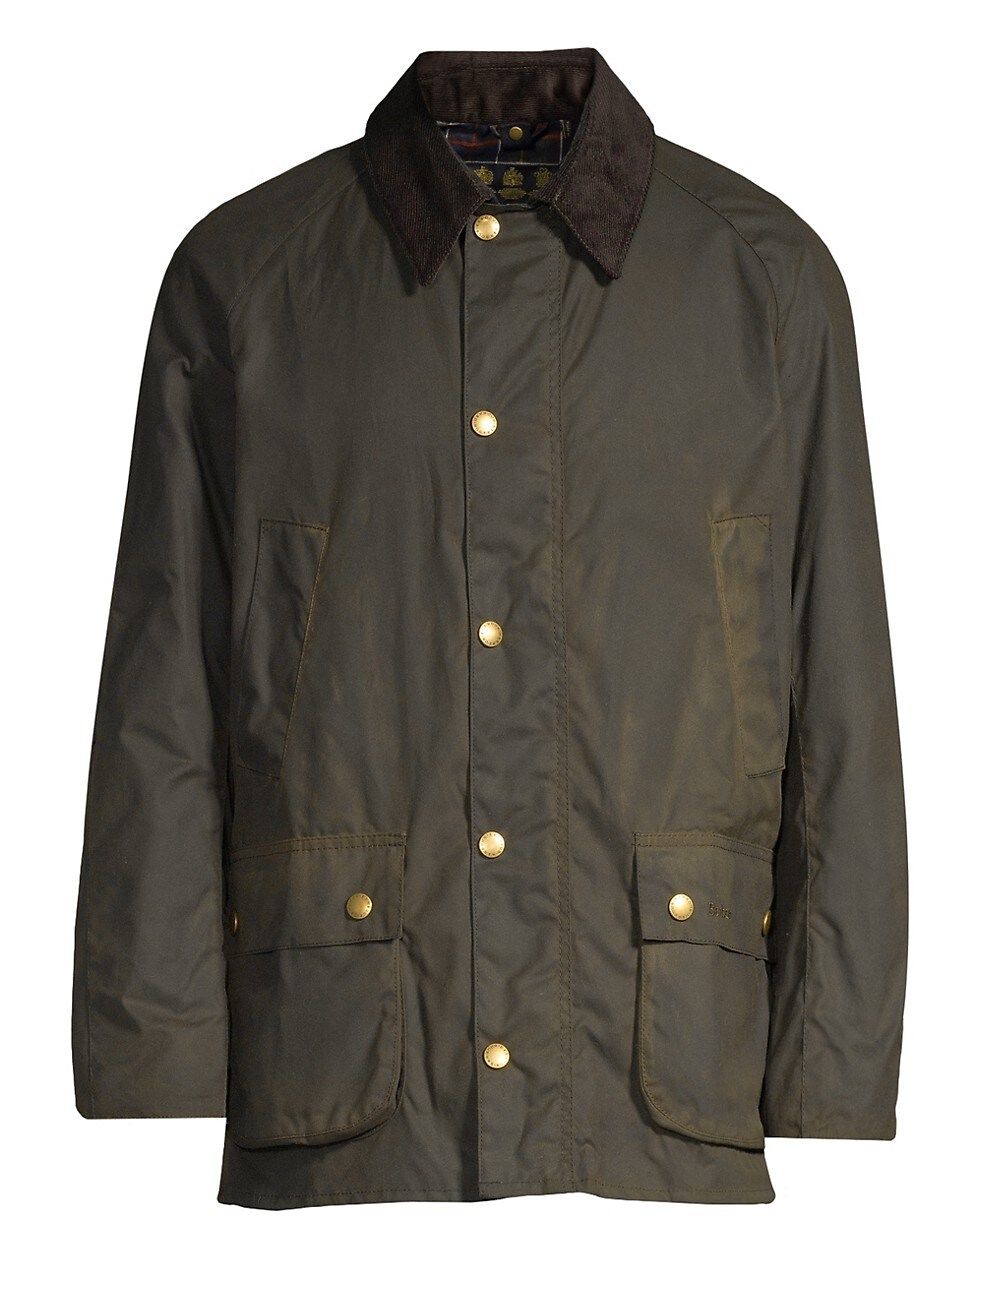 Barbour Ashby Wax Jacket | Saks Fifth Avenue